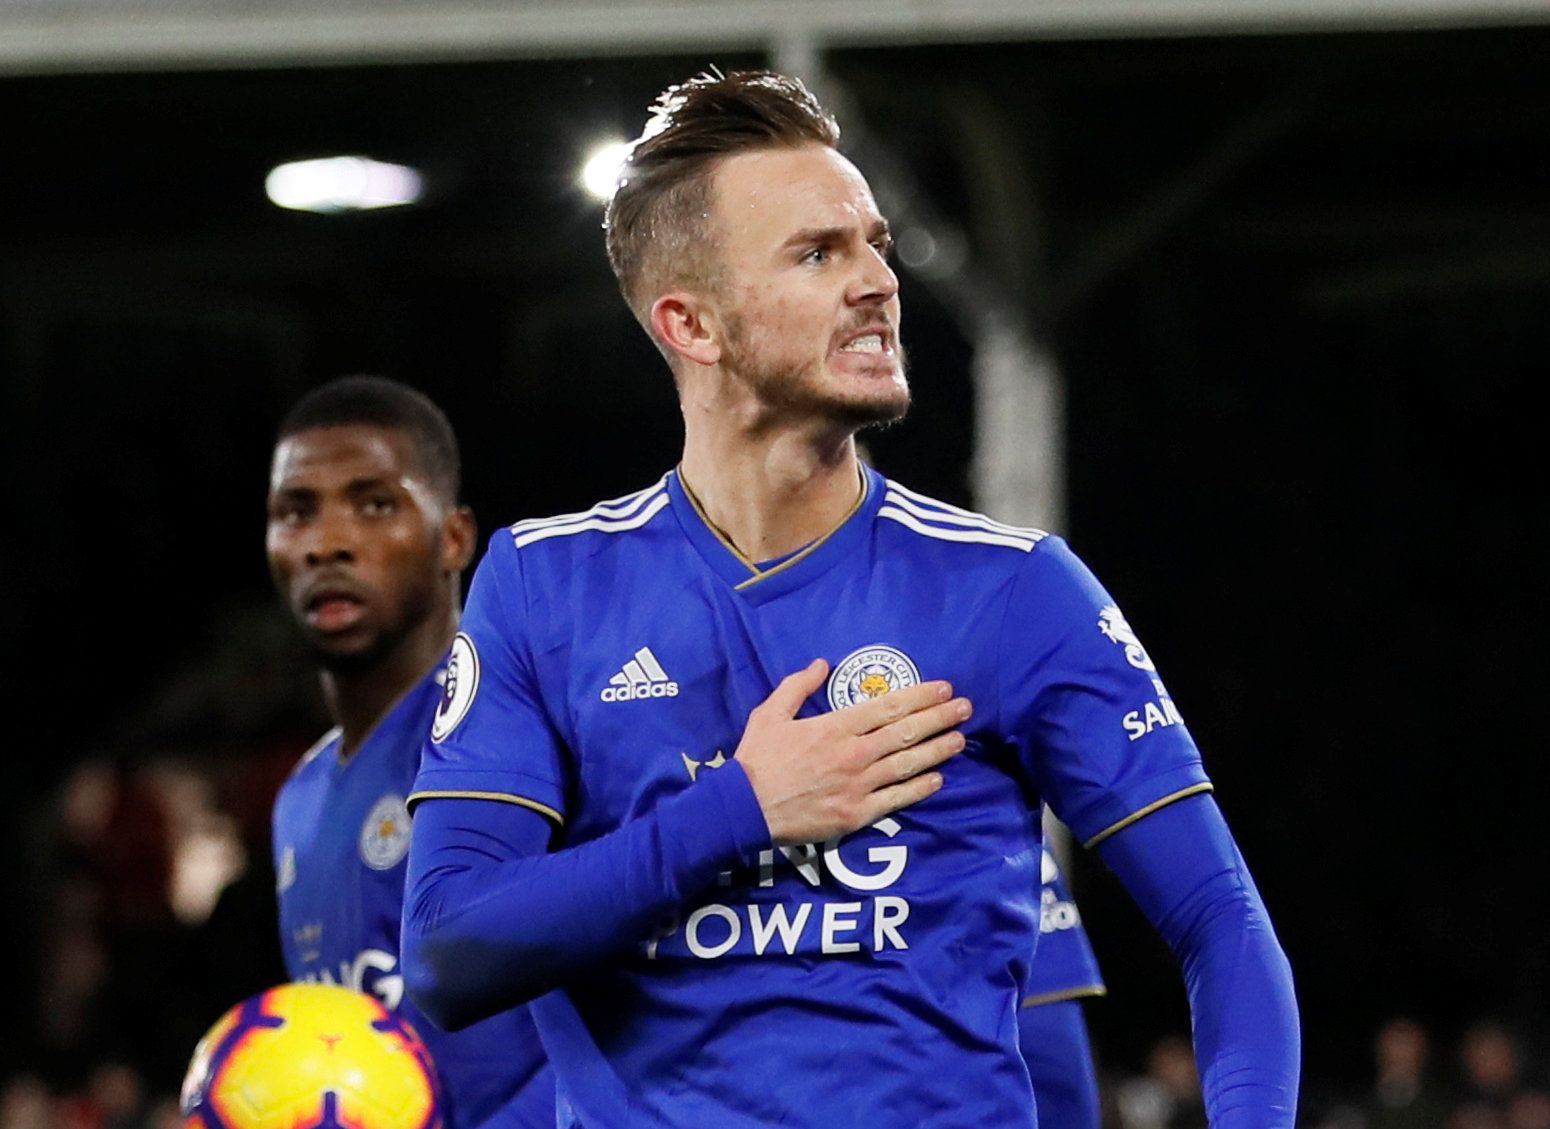 Soccer Football - Premier League - Fulham v Leicester City - Craven Cottage, London, Britain - December 5, 2018  Leicester City's James Maddison celebrates scoring their first goal    REUTERS/David Klein  EDITORIAL USE ONLY. No use with unauthorized audio, video, data, fixture lists, club/league logos or 